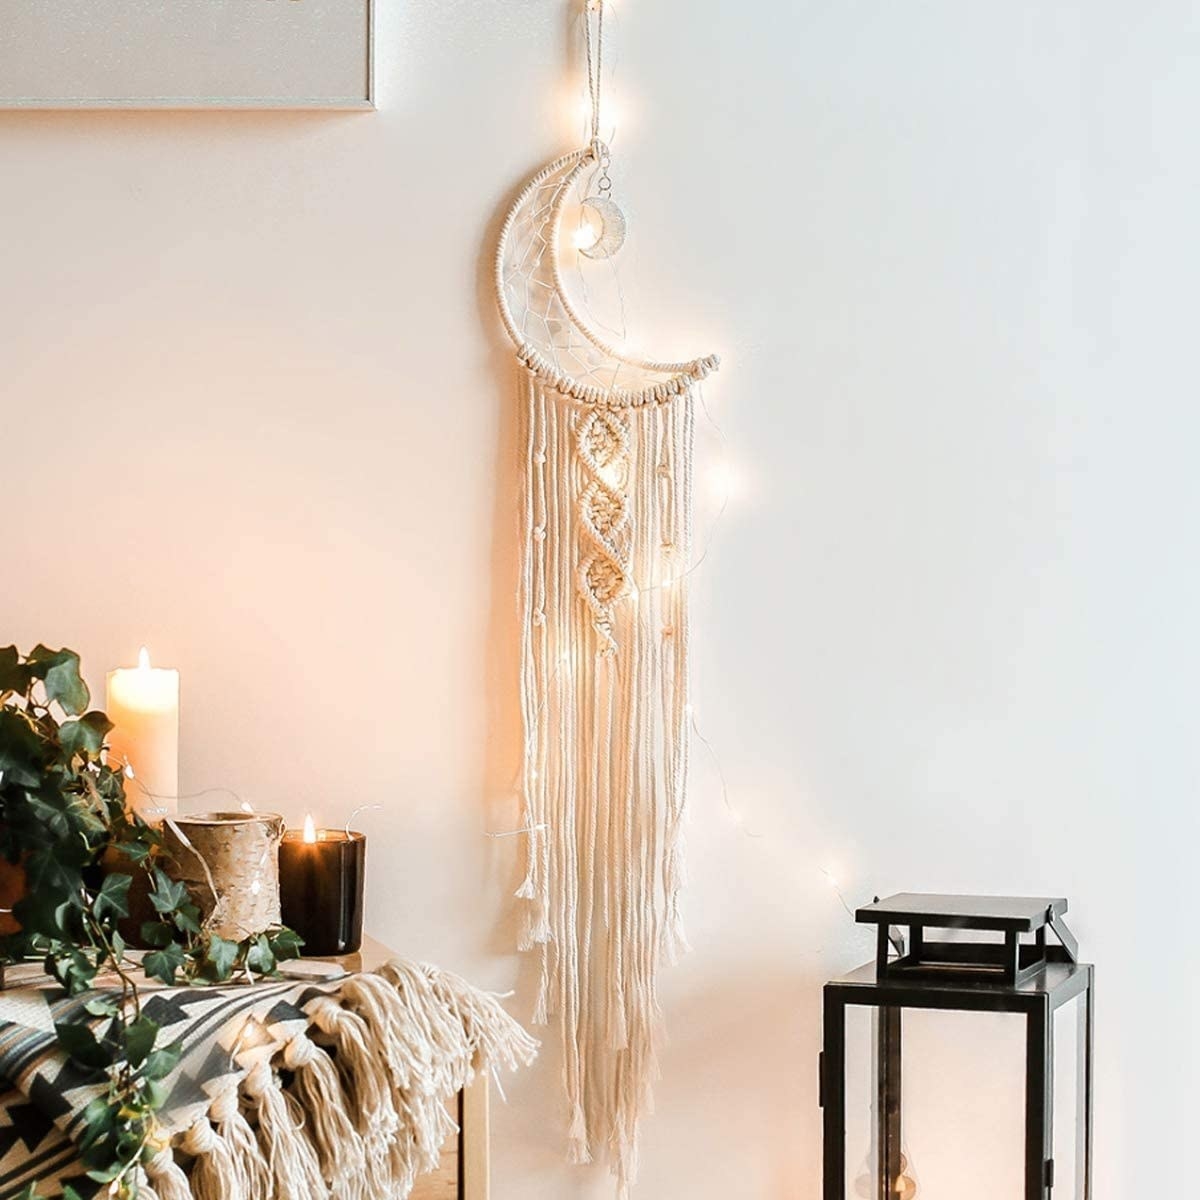 The moon shaped macrame wall hanging on a wall beside some candles